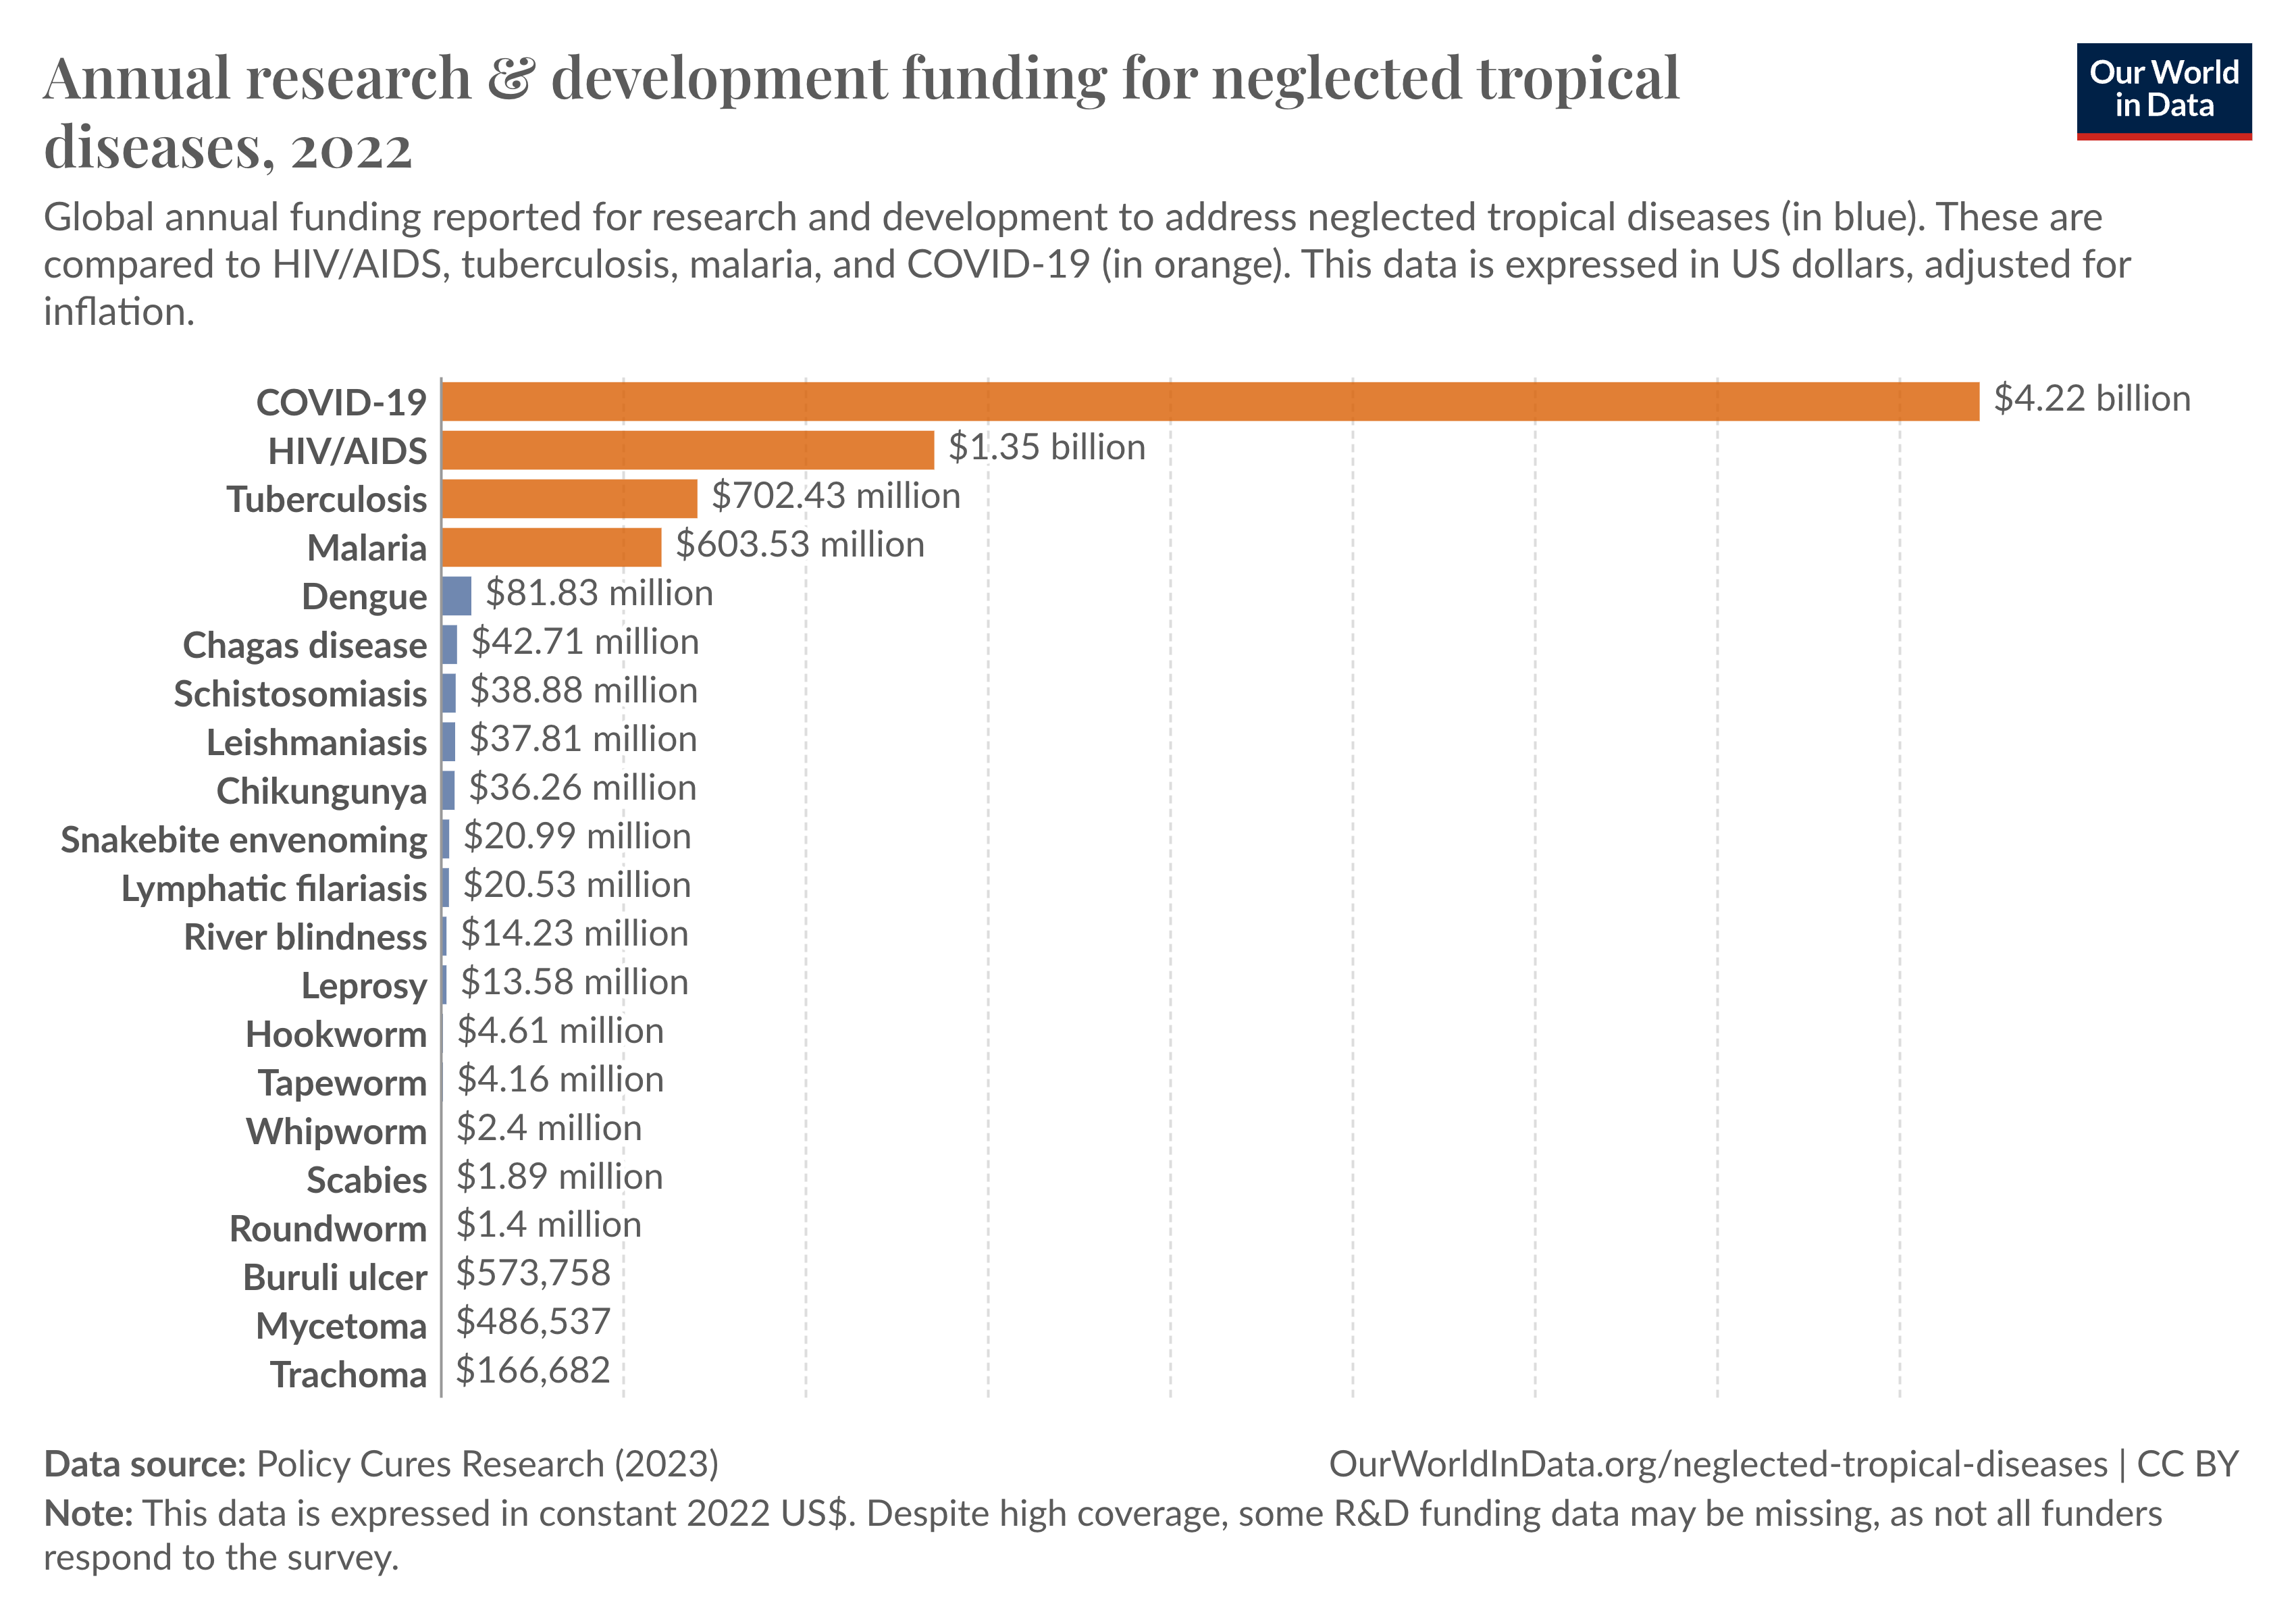 This chart, titled "Annual research & development funding for neglected tropical diseases, 2022," shows the total annual funding reported for research and development to address various neglected tropical diseases (indicated in blue), as compared to HIV/AIDS, tuberculosis, malaria, and COVID-19 (indicated in purple).

The data source is Policy Cures Research (2023), and the values are expressed in constant 2022 US dollars. The chart highlights the following funding amounts:

COVID-19: $4.22 billion
HIV/AIDS: $1.35 billion
Tuberculosis: $702.43 million
Malaria: $603.53 million
Dengue: $81.83 million
Chagas disease: $42.71 million
Schistosomiasis: $38.88 million
Leishmaniasis: $37.81 million, and more.